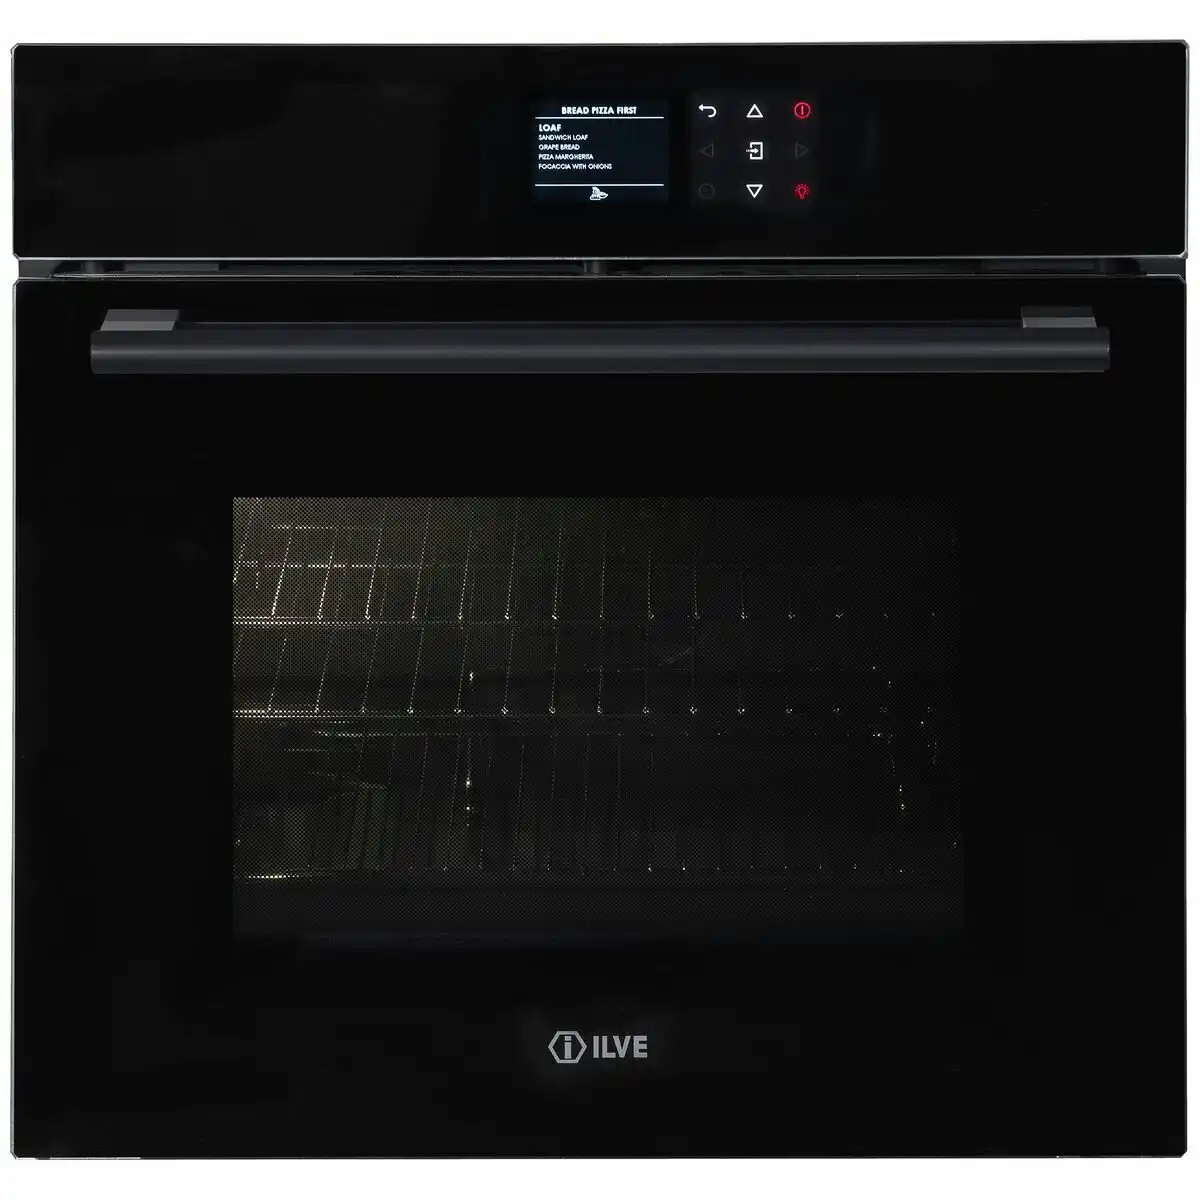 Ilve 60cm Pyrolytic Oven